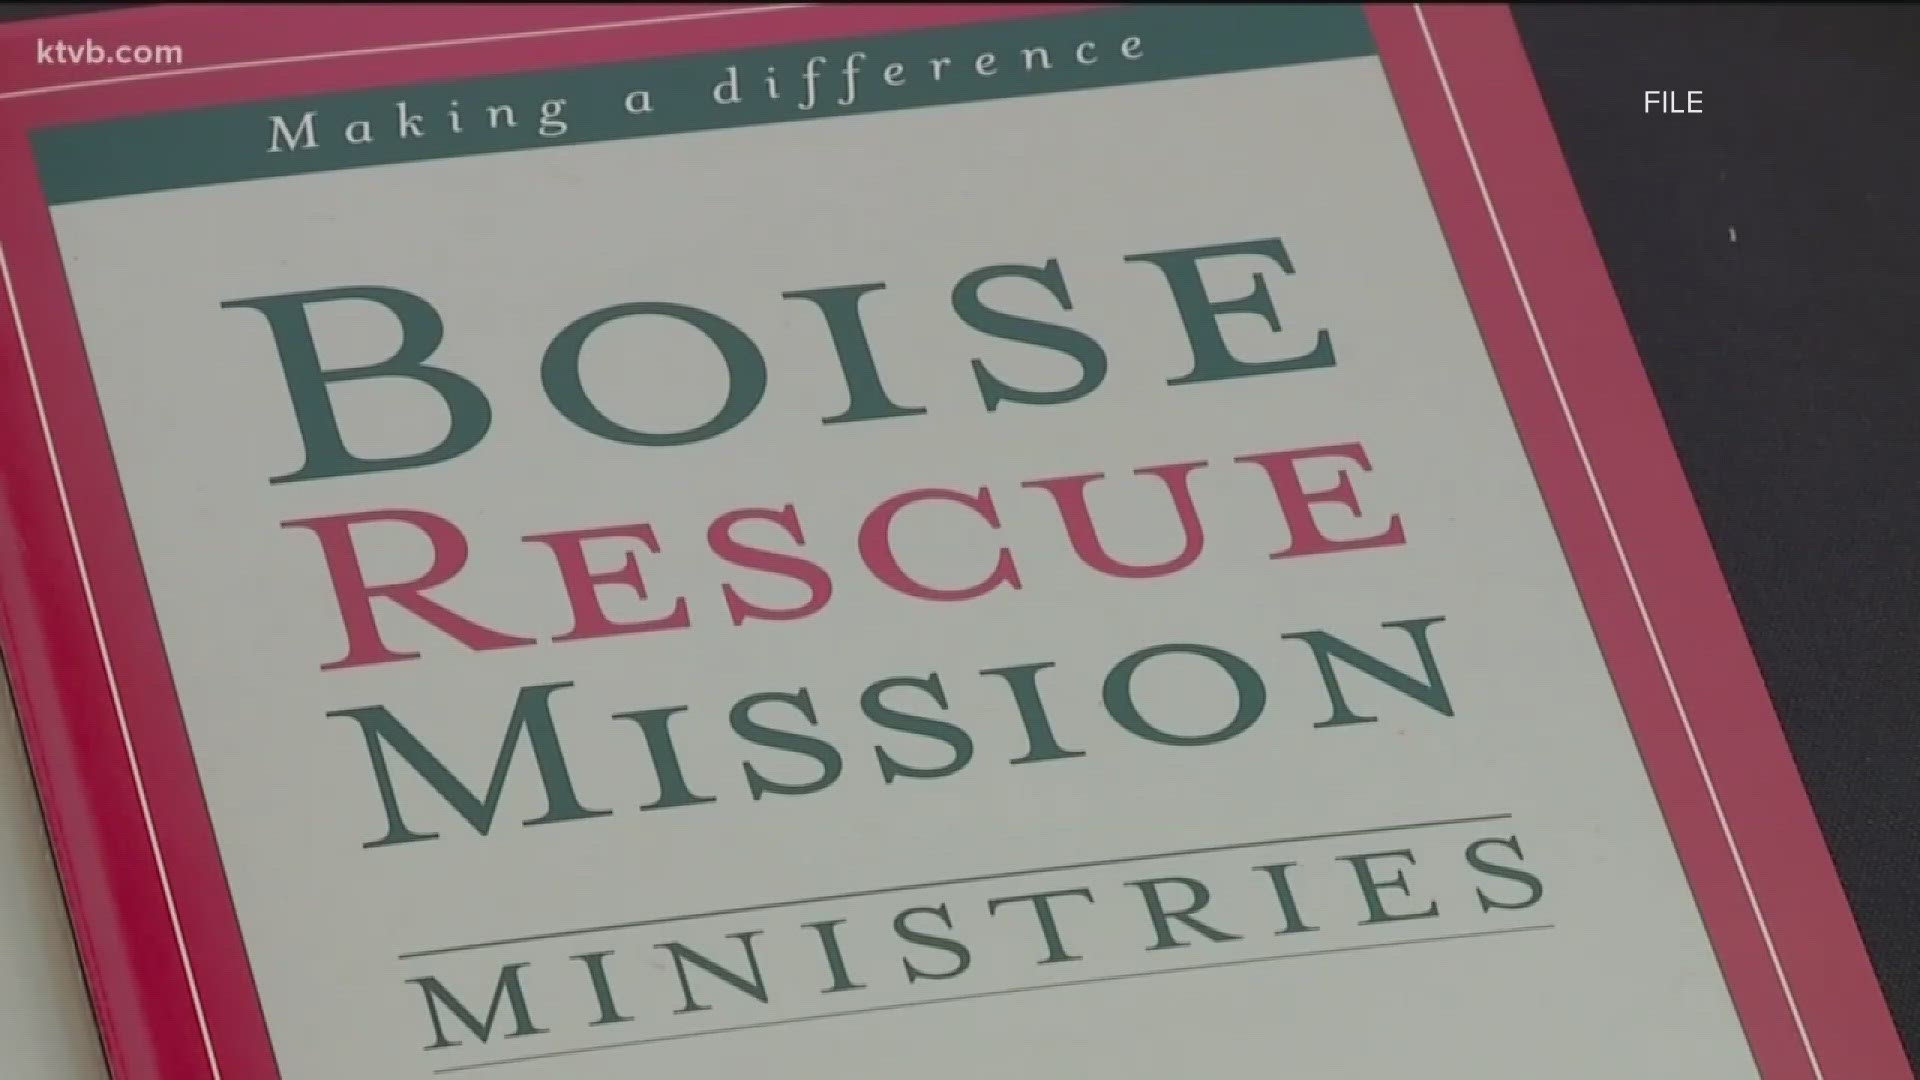 During the May Match Campaign, the Harold E. & Phyllis S. Thomas Foundation will match all donations to the Boise Rescue Mission up to $65,000.